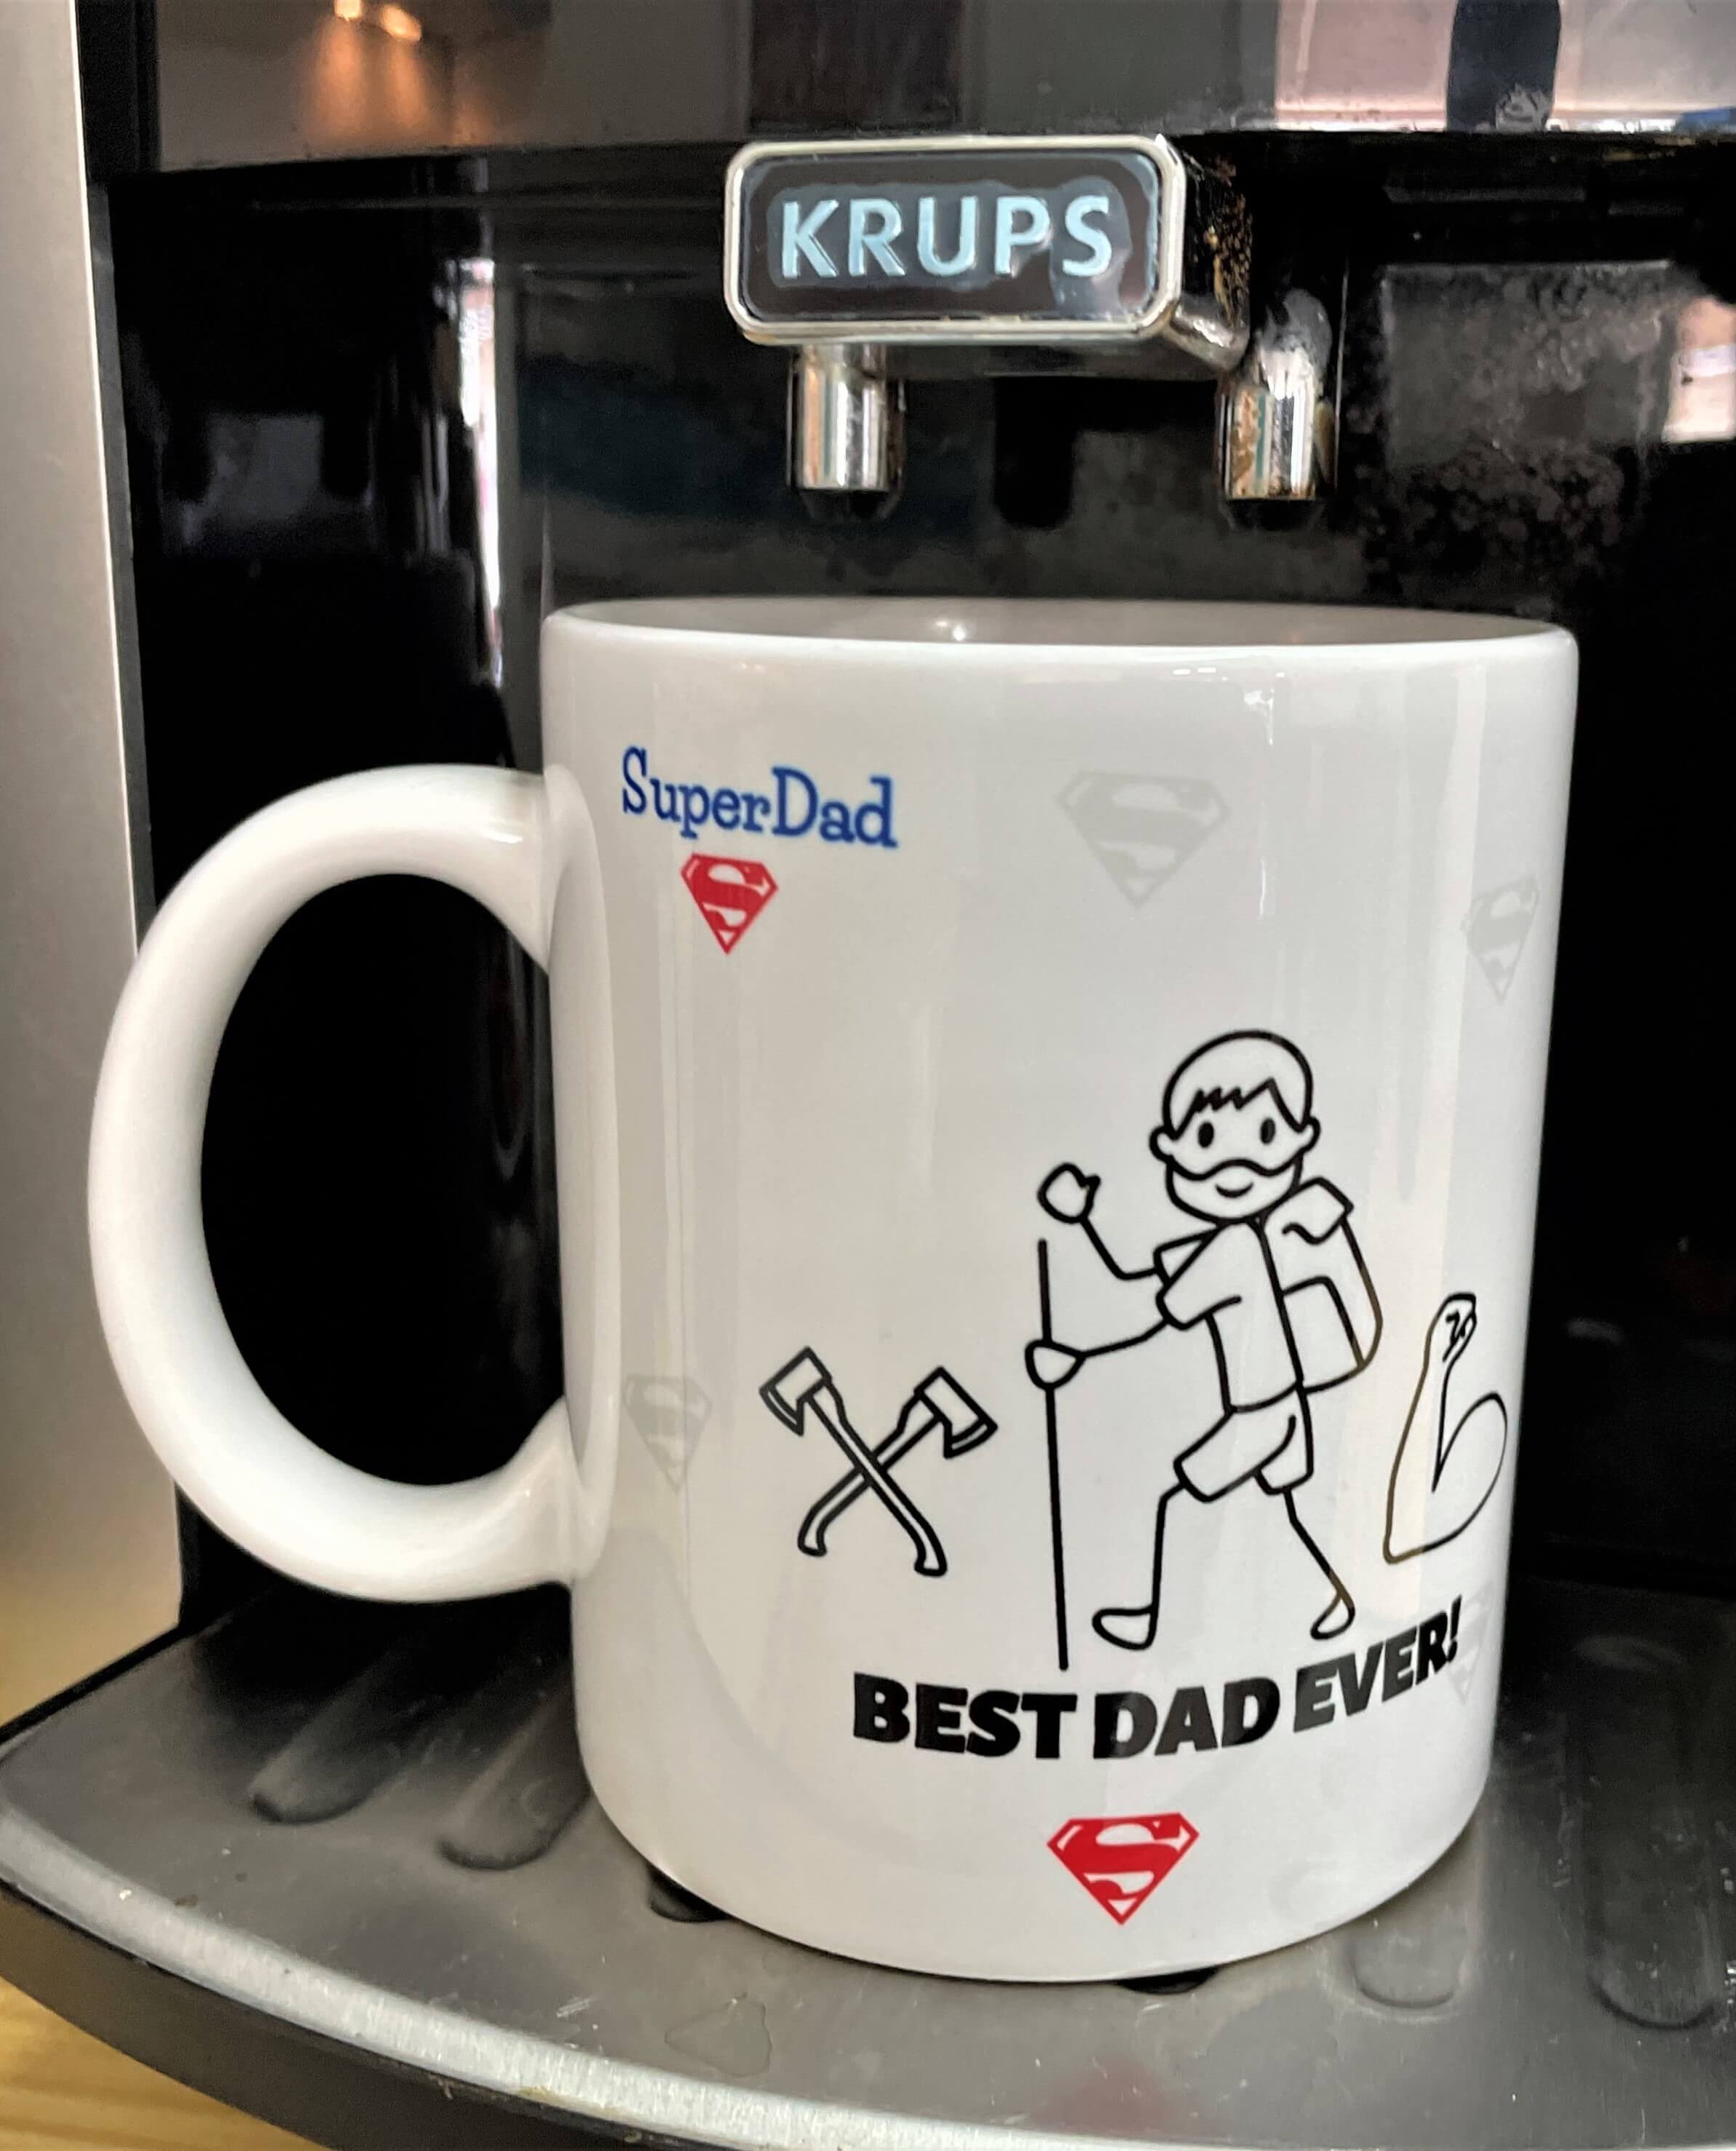 Personalised mugs as gift ideas for fathers day